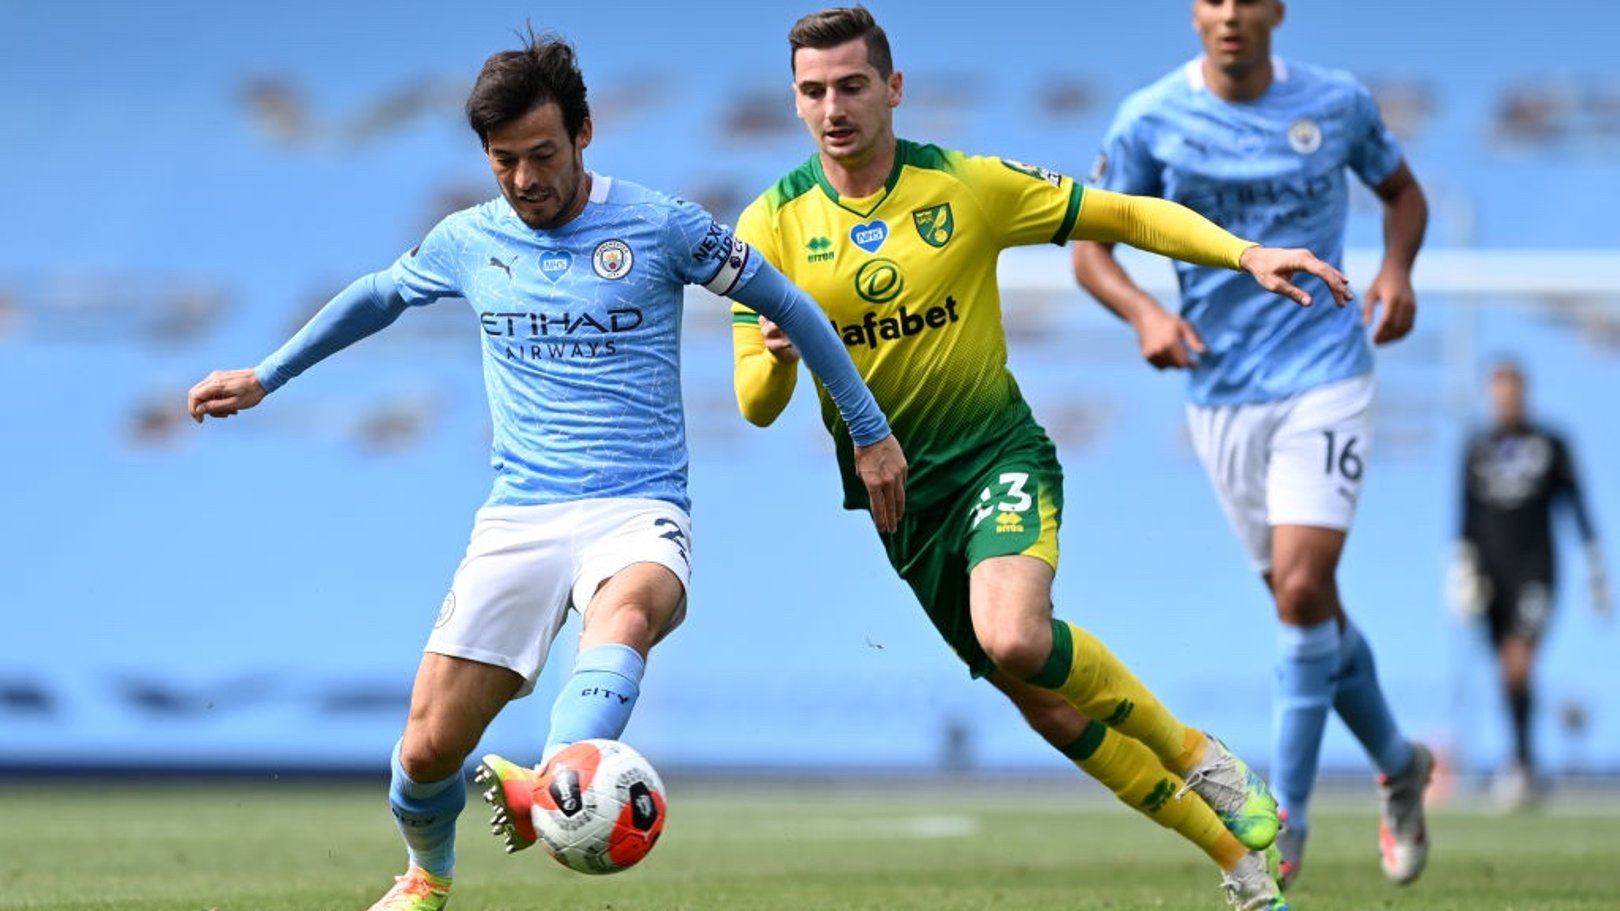 Silva moves into all-time City top 10